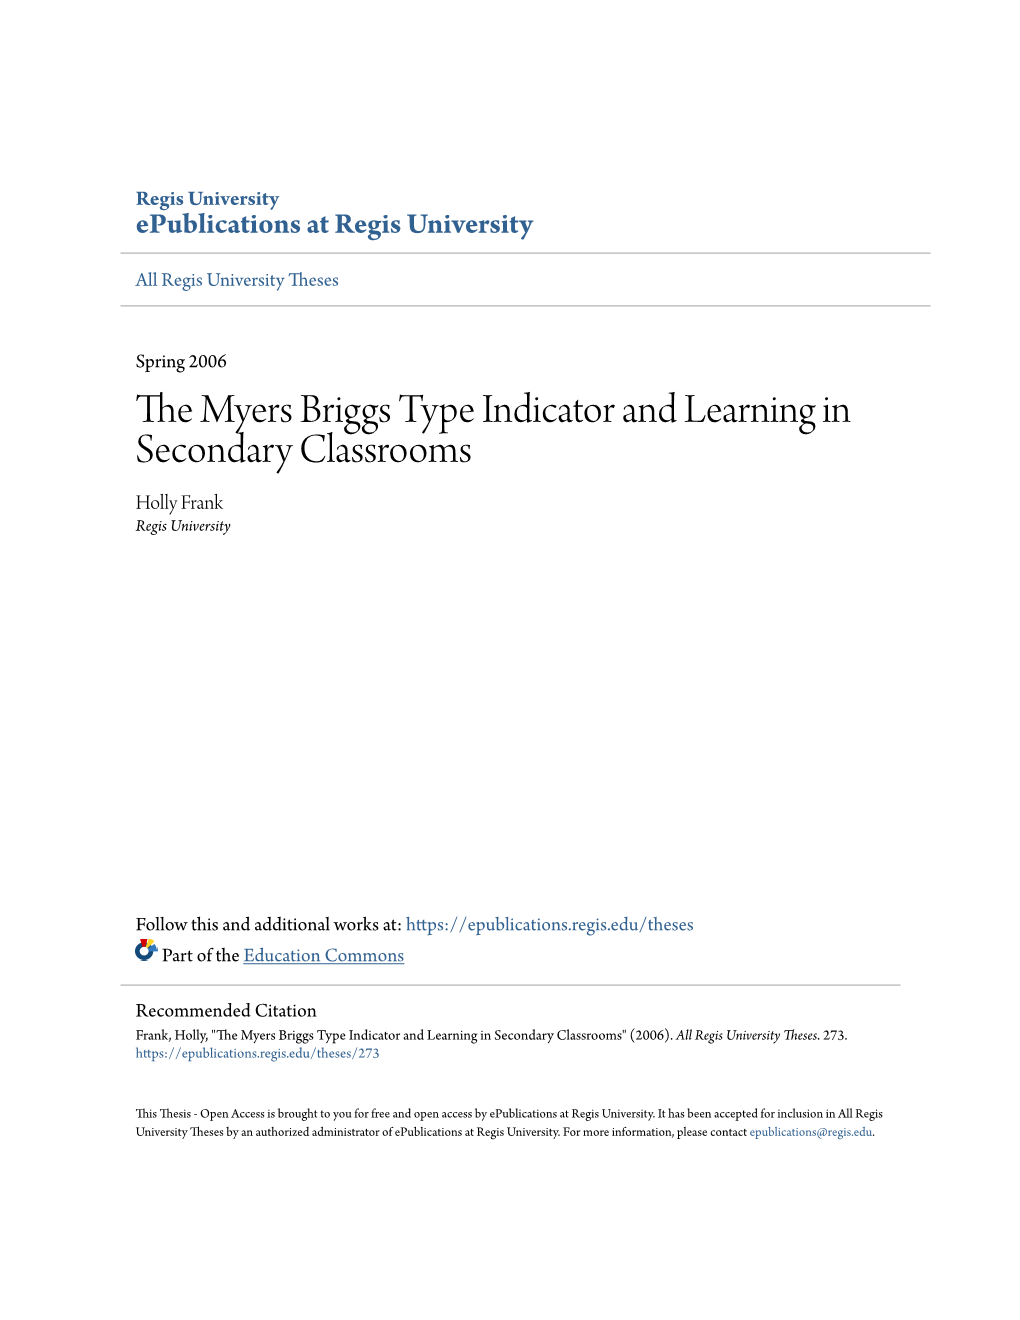 The Myers Briggs Type Indicator and Learning in Secondary Classrooms